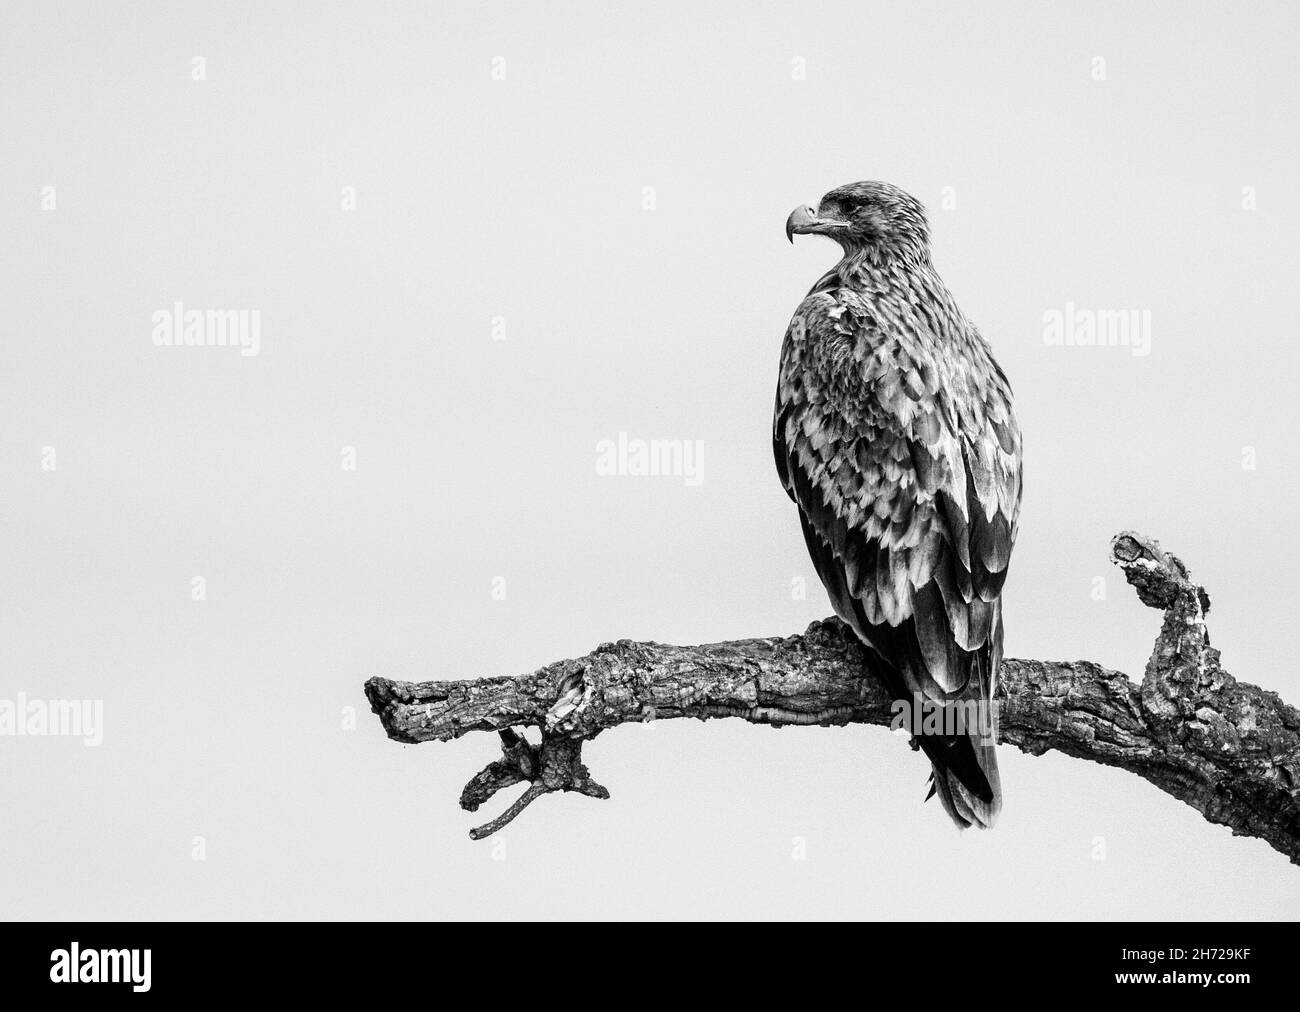 Spanish Imperial Eagle (Adult) Stock Photo